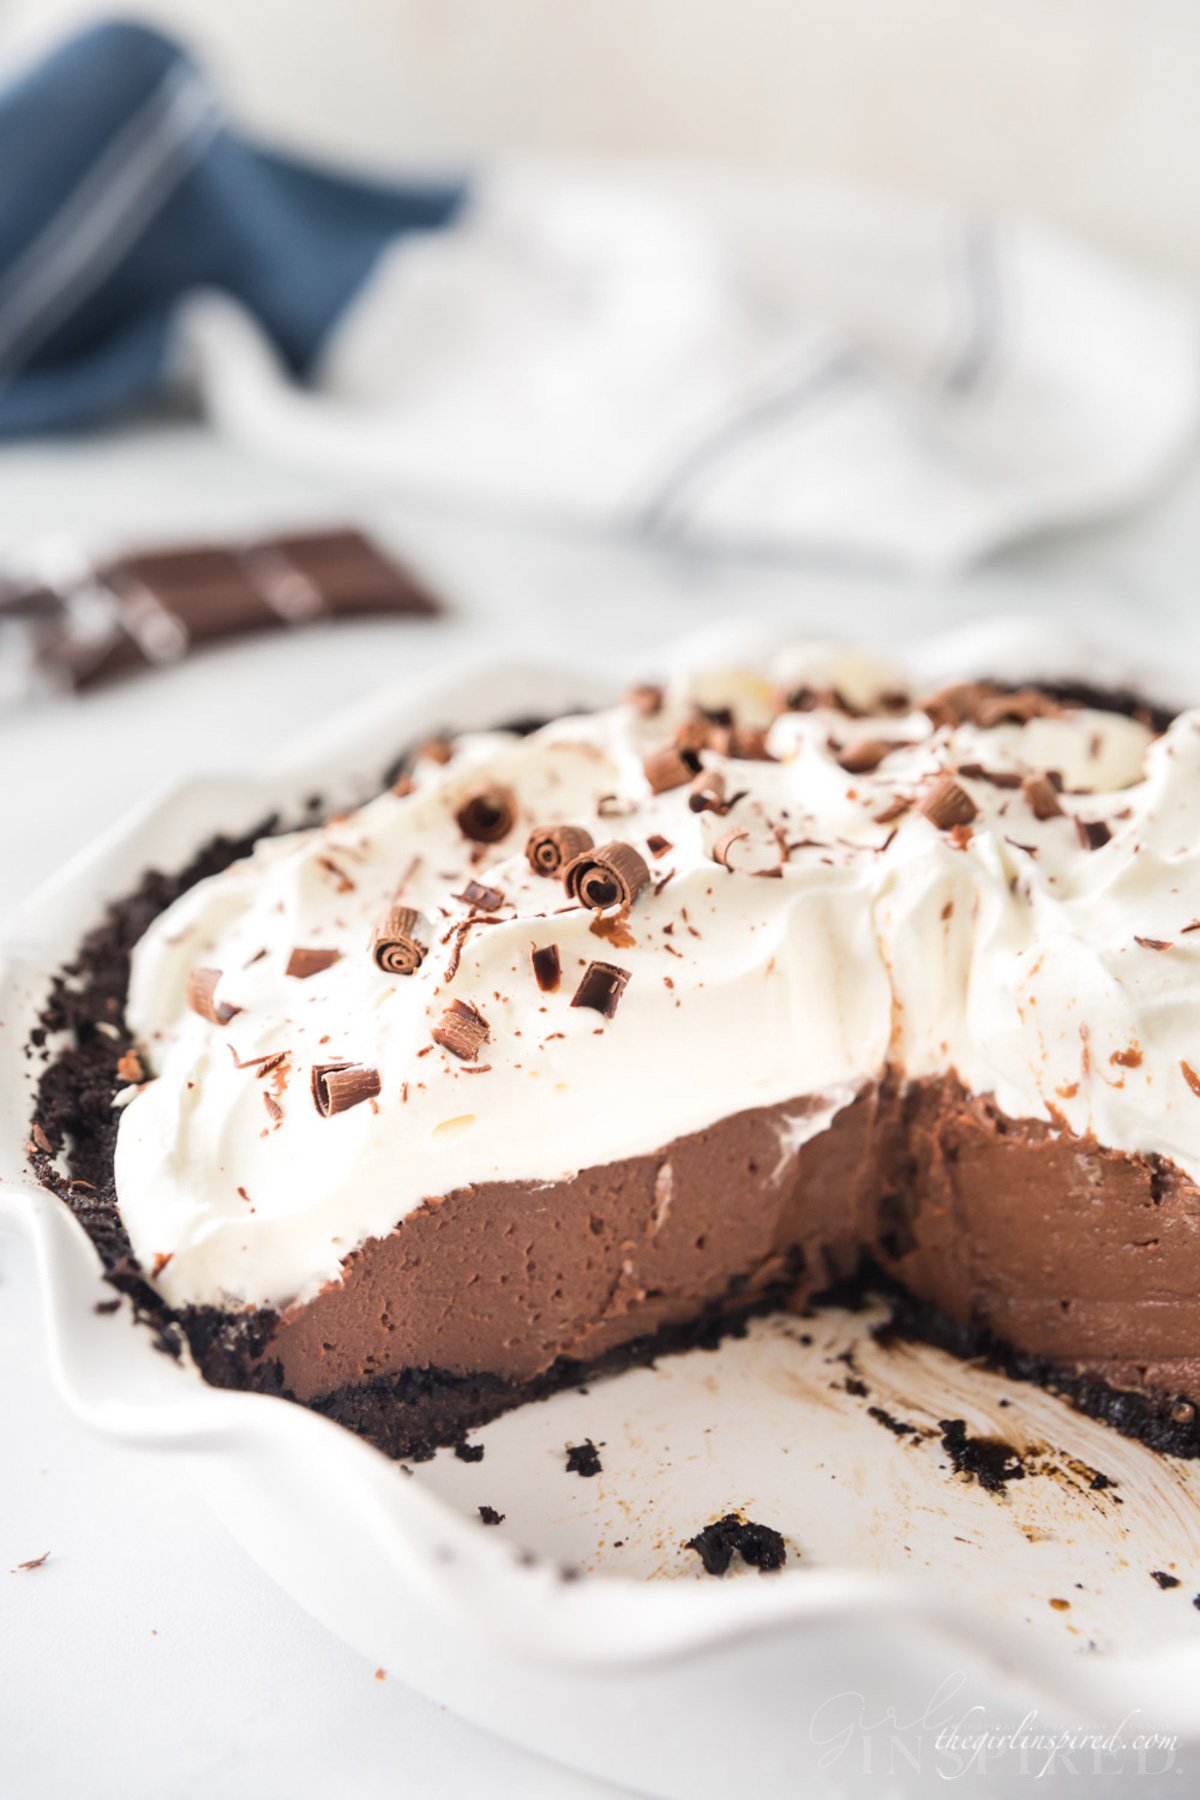 Chocolate cream pie, with several slices removed showing layers of cookie crust, chocolate custard filling, and whipped cream topping.